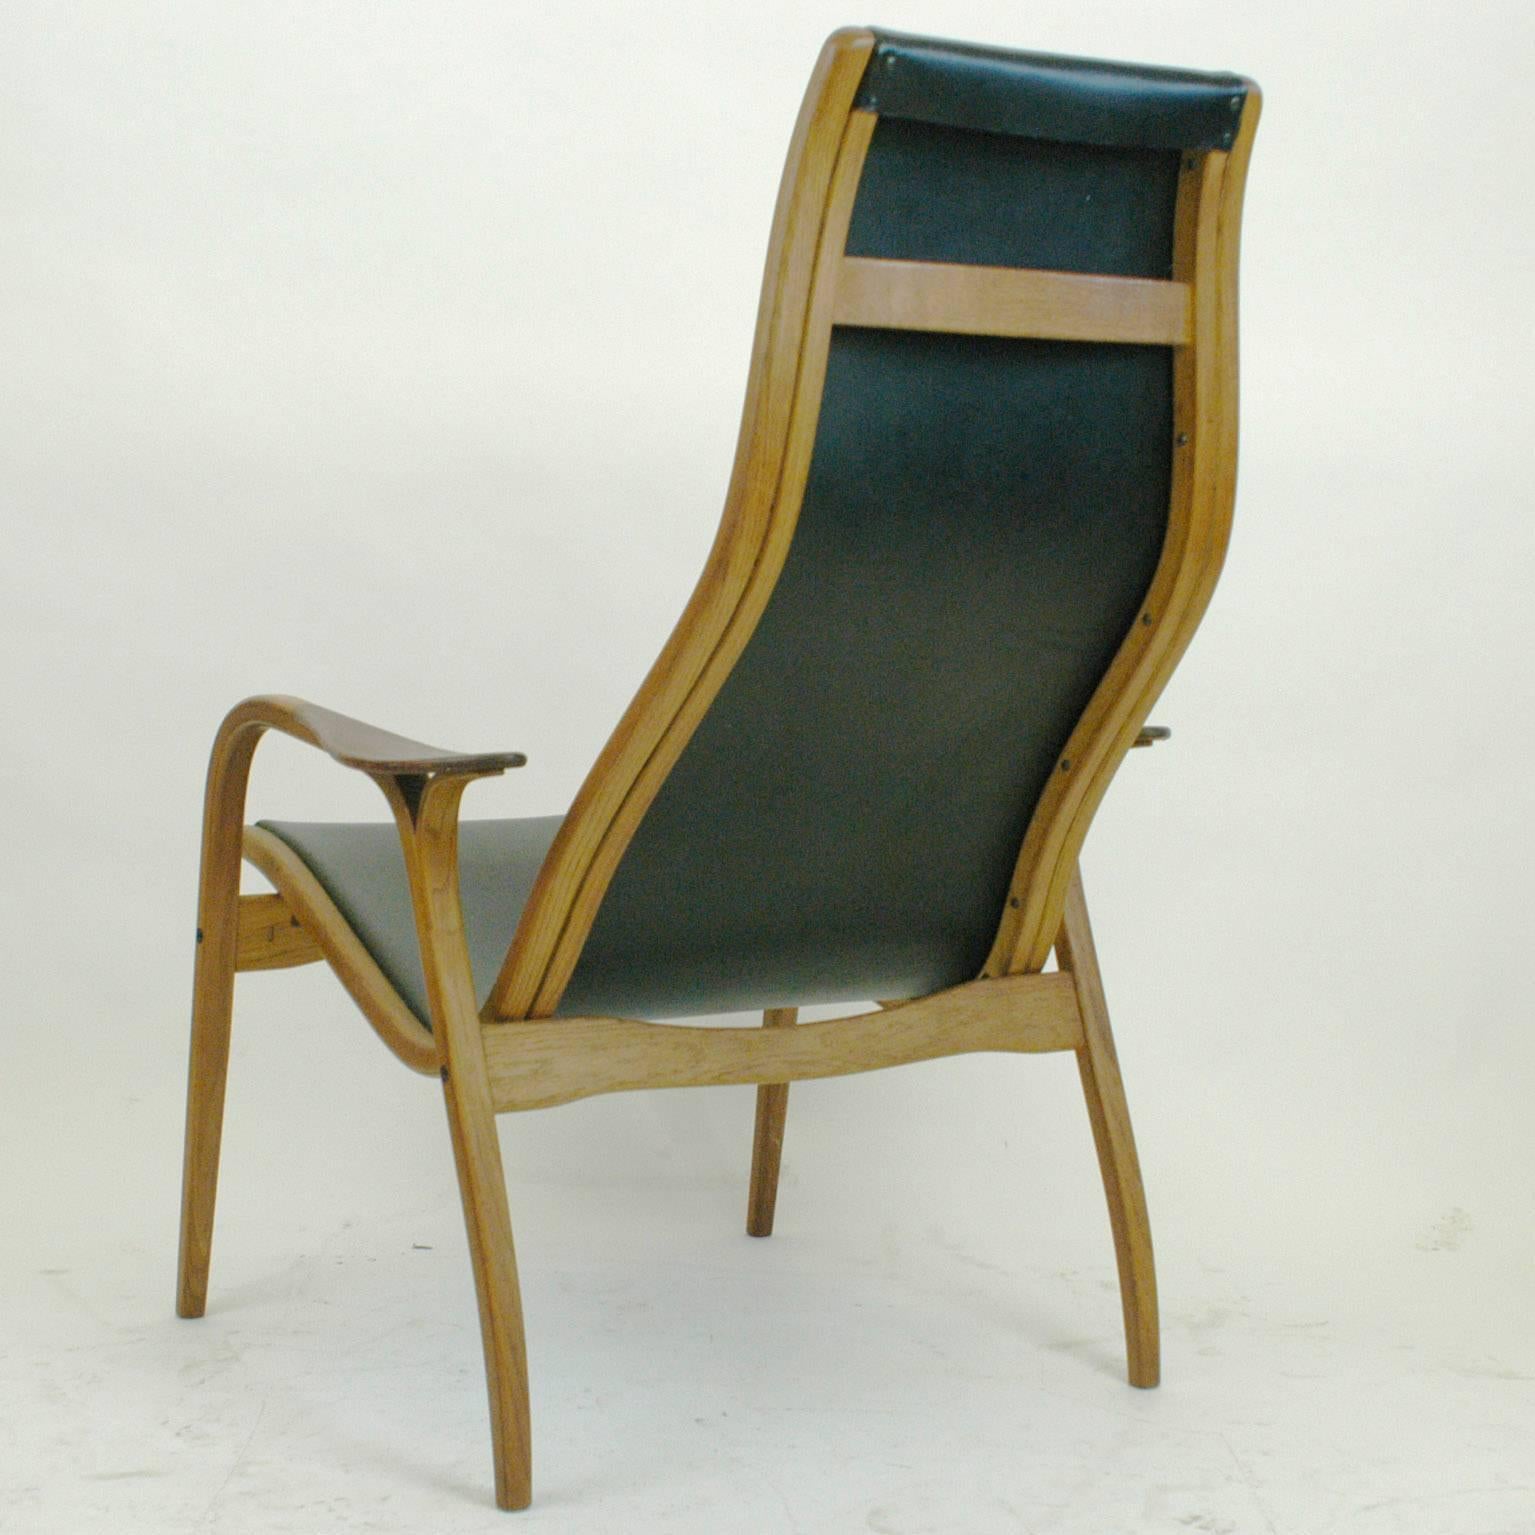 Swedish Vintage Oak and Black Leather Highback Lamino Chair by Yngve Ekstrom for Swedese